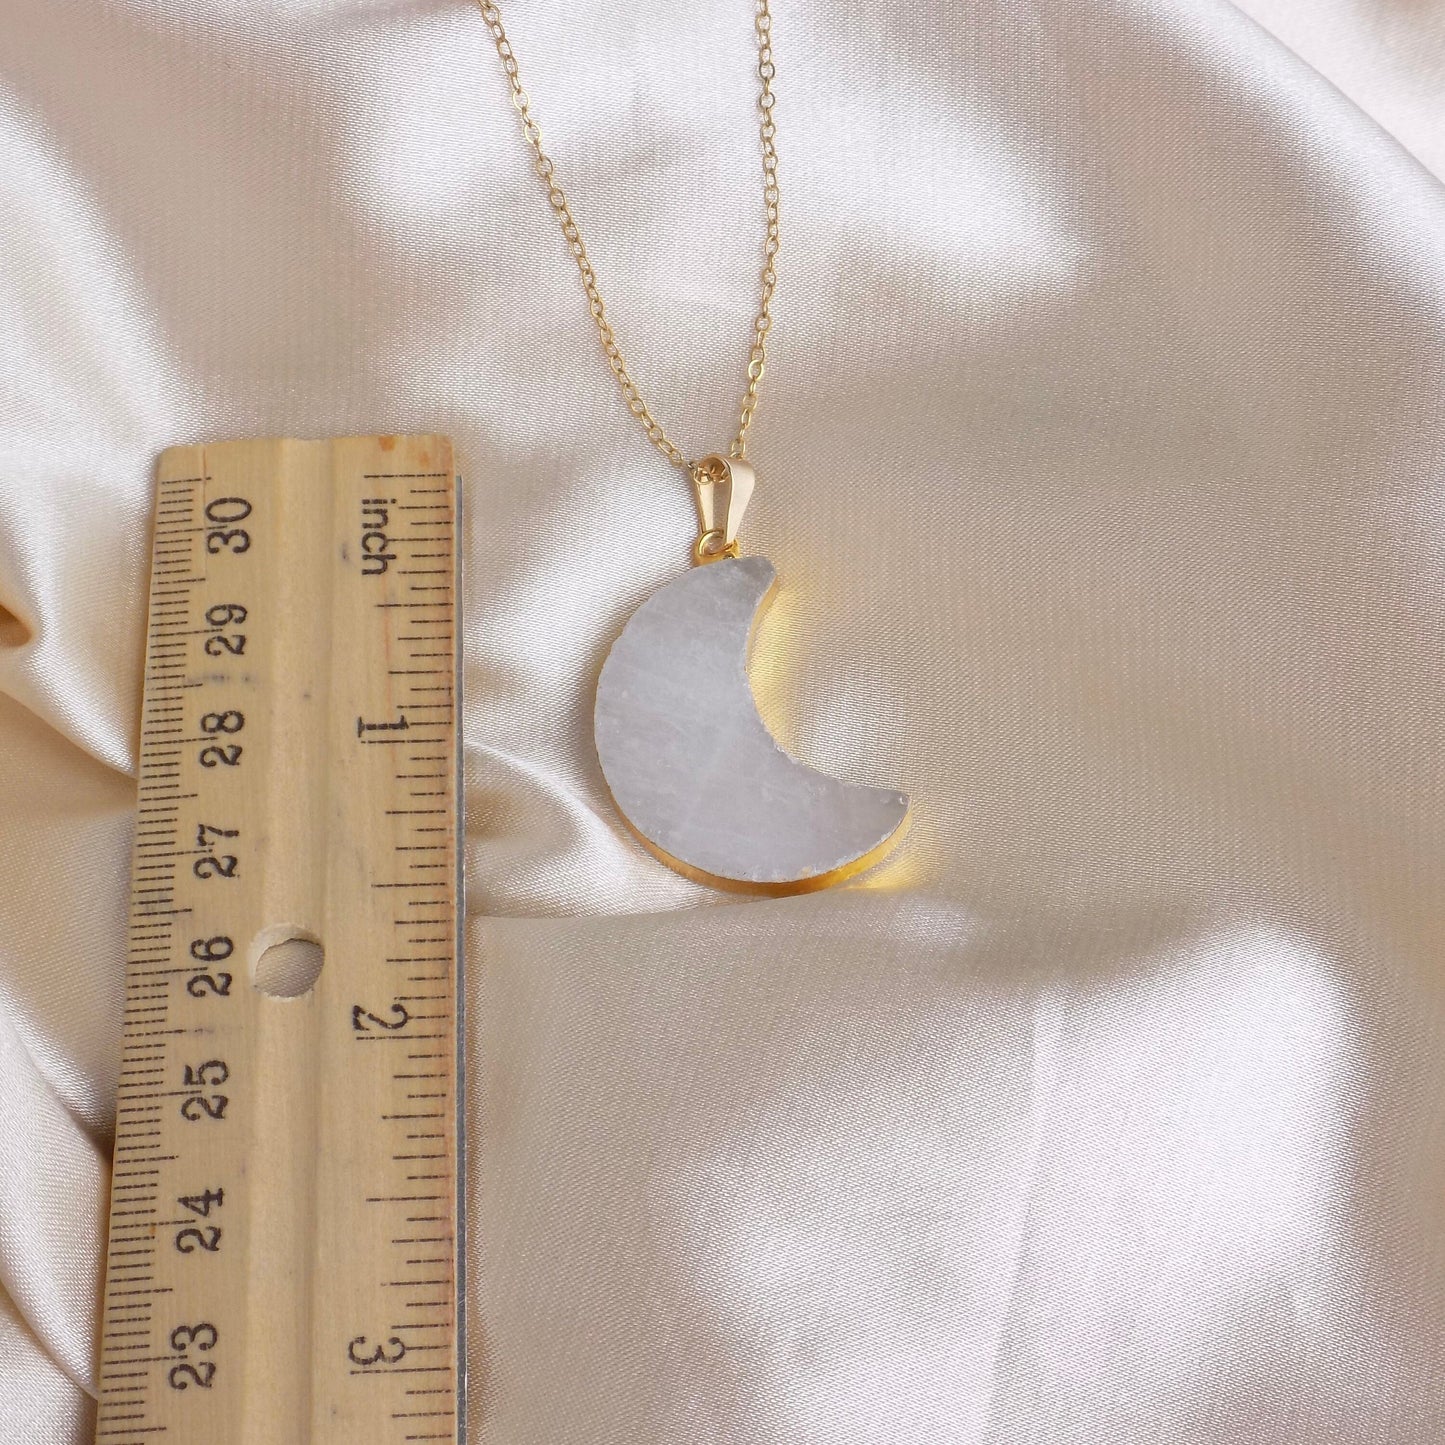 Crescent Moon Crystal Necklace Gold, White Quartz Pendant, Large Moon Charm, Boho Christmas Gifts For Her, R14-14